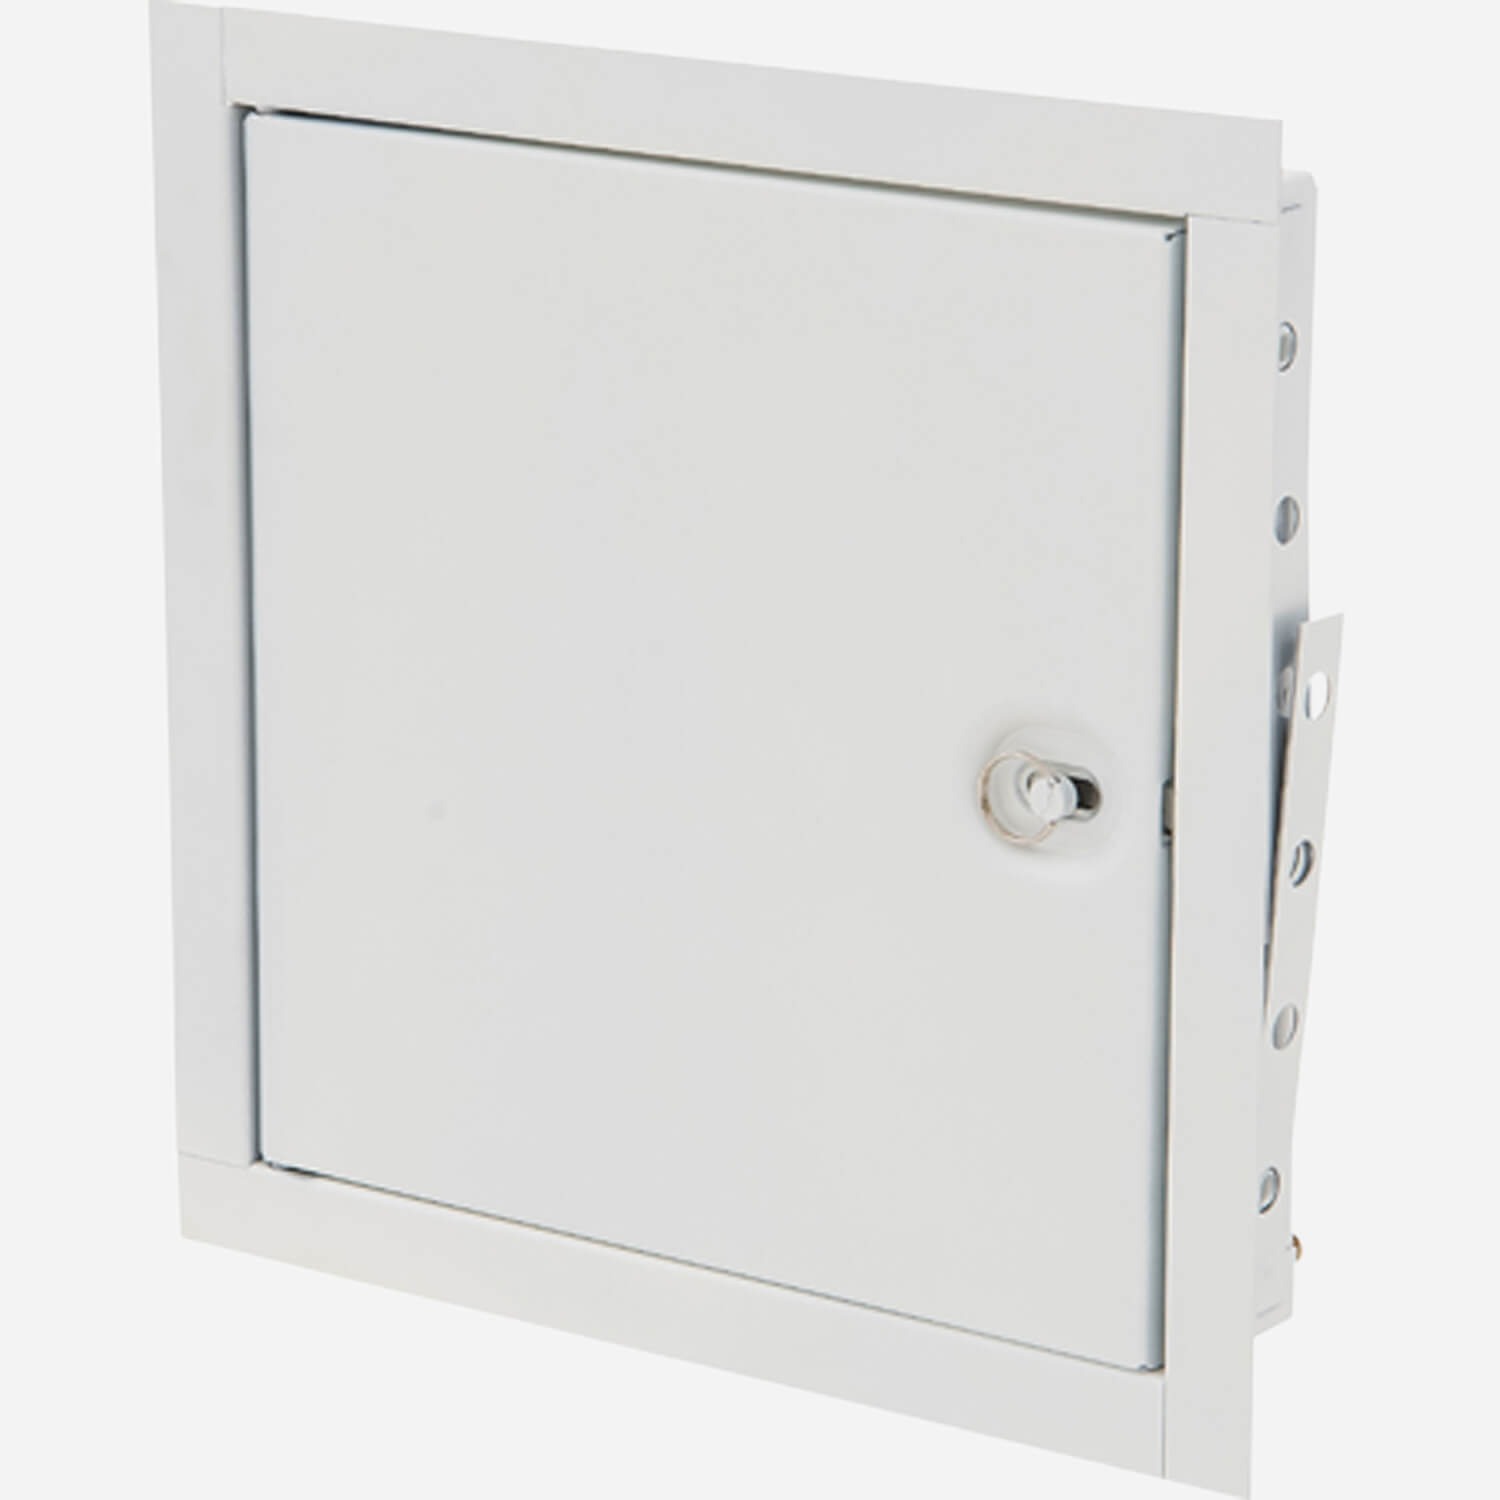 Access Door - E-FR 12" x 18" Non-Insulated Fire Rated for Walls